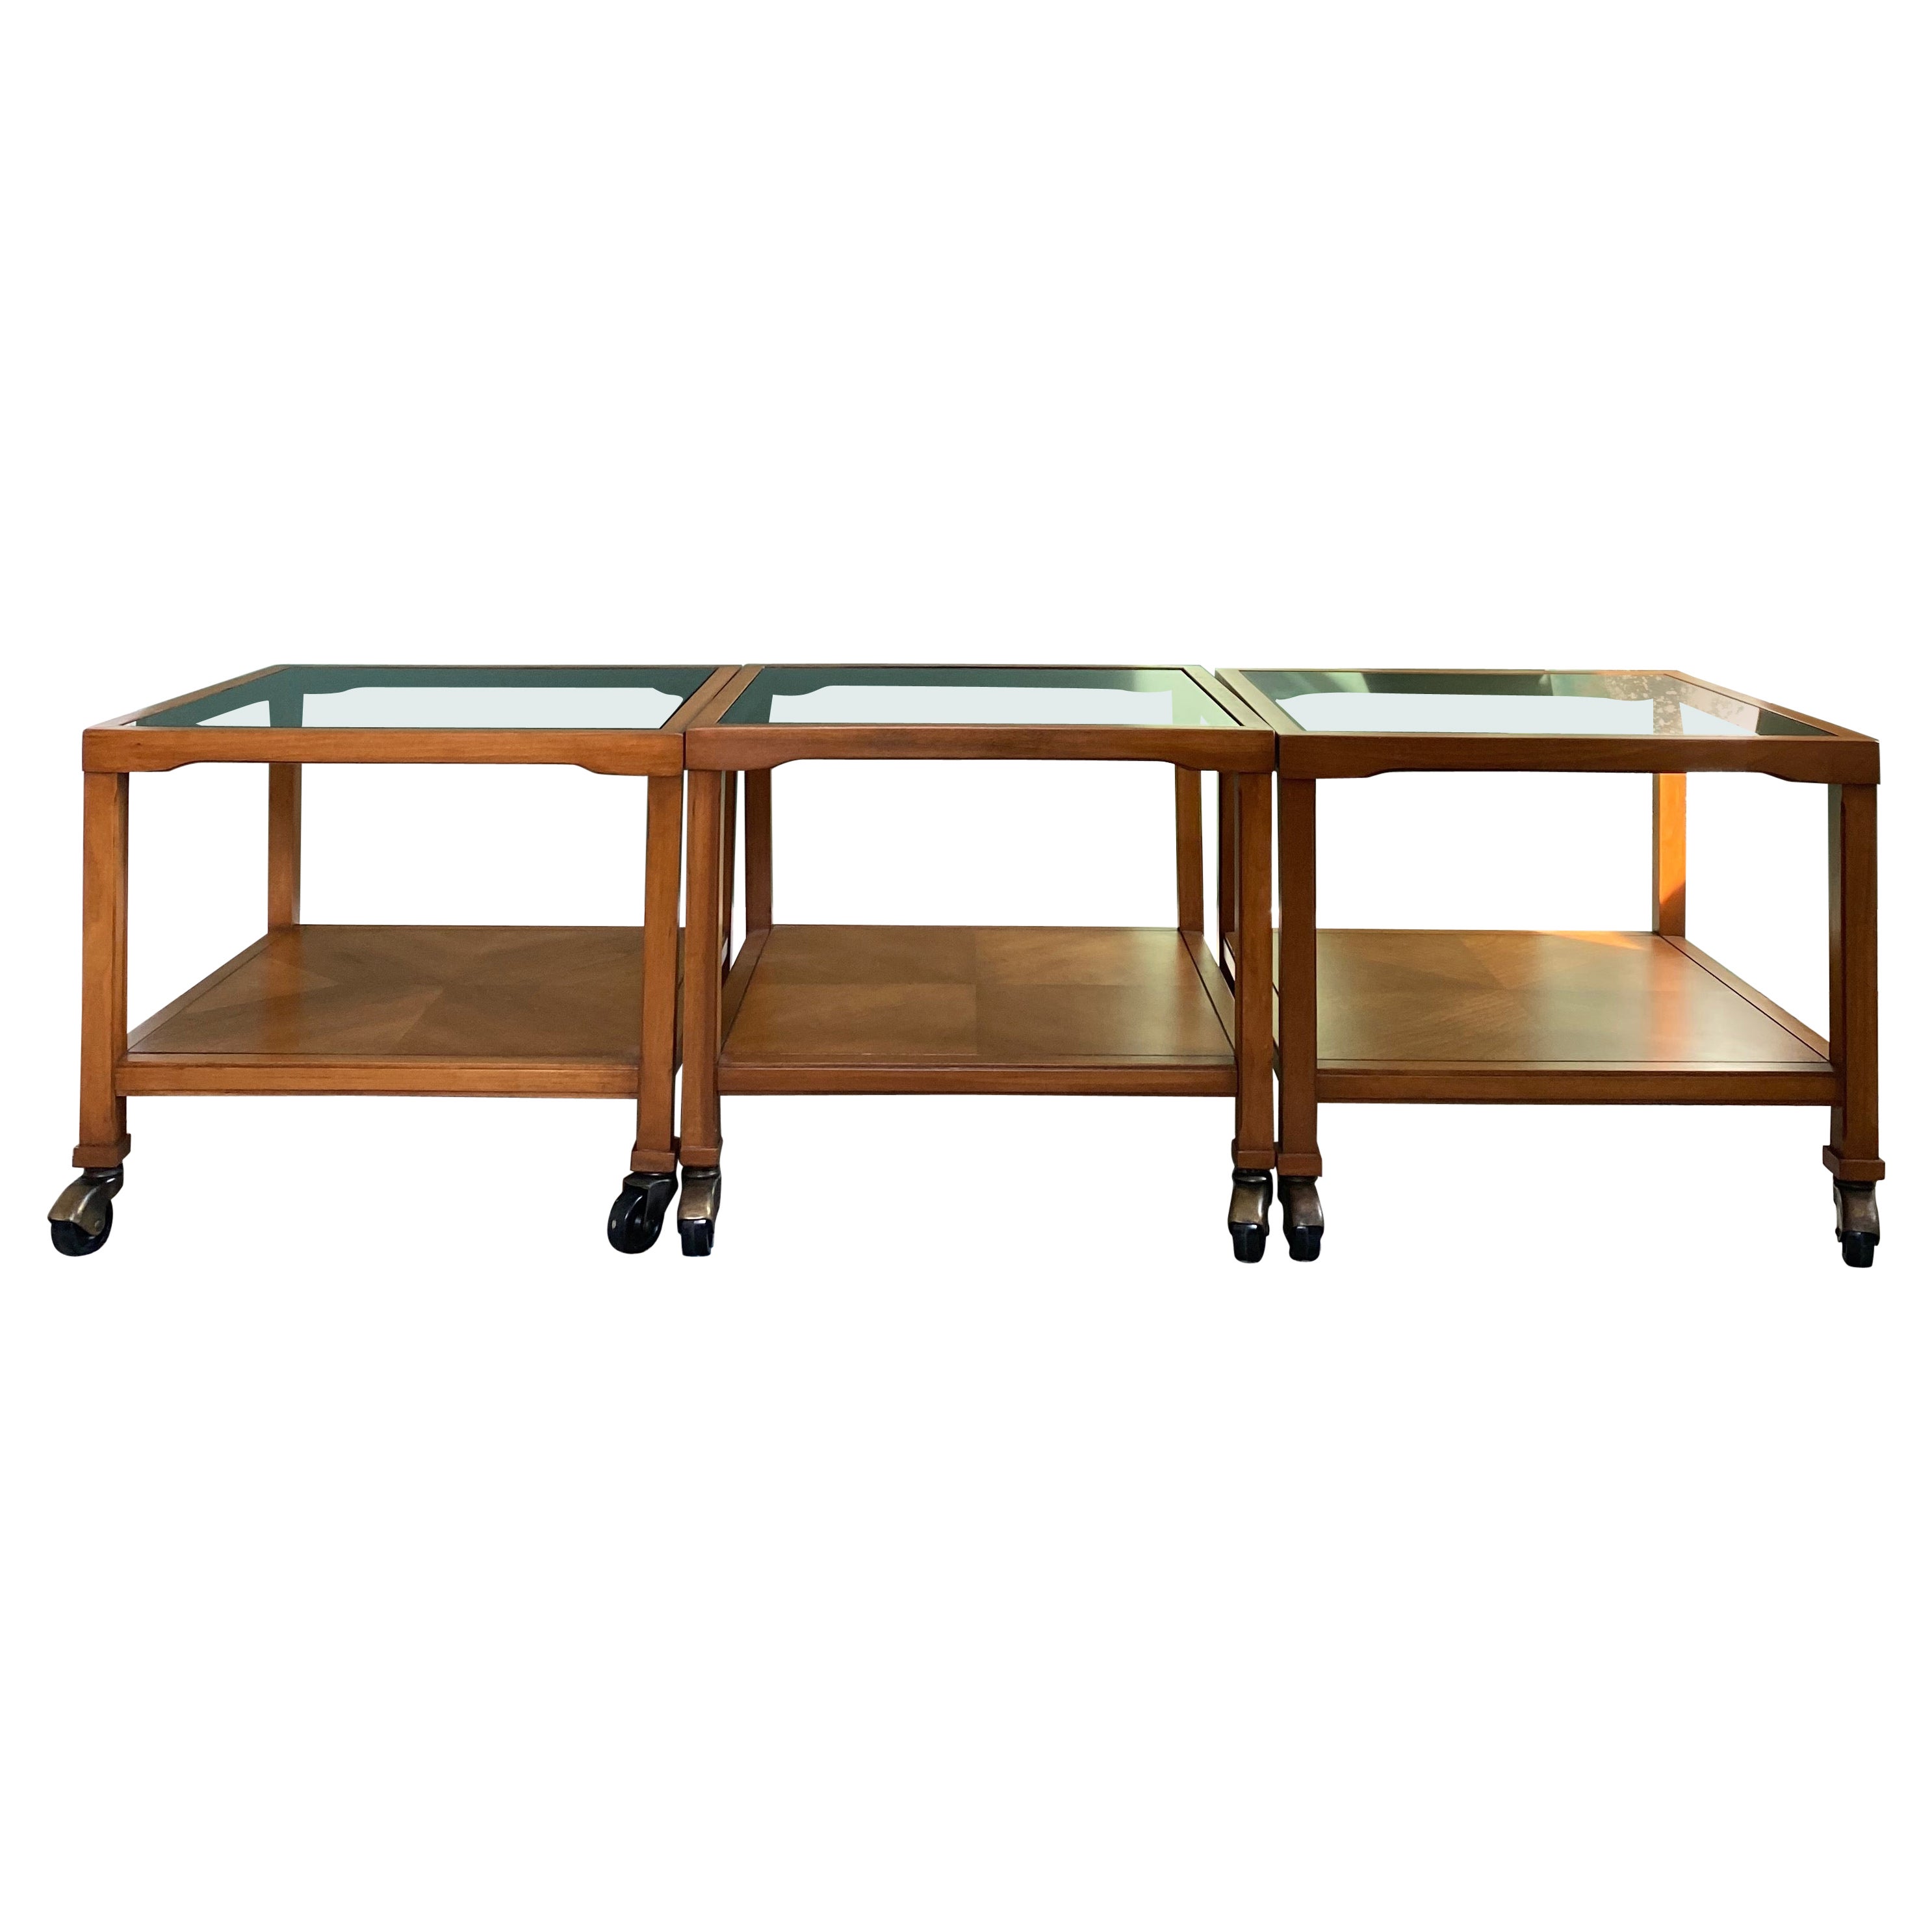 Set of 3 Drexel "Et Cetera" Side Tables With Tinted Glass Top & Casters For Sale